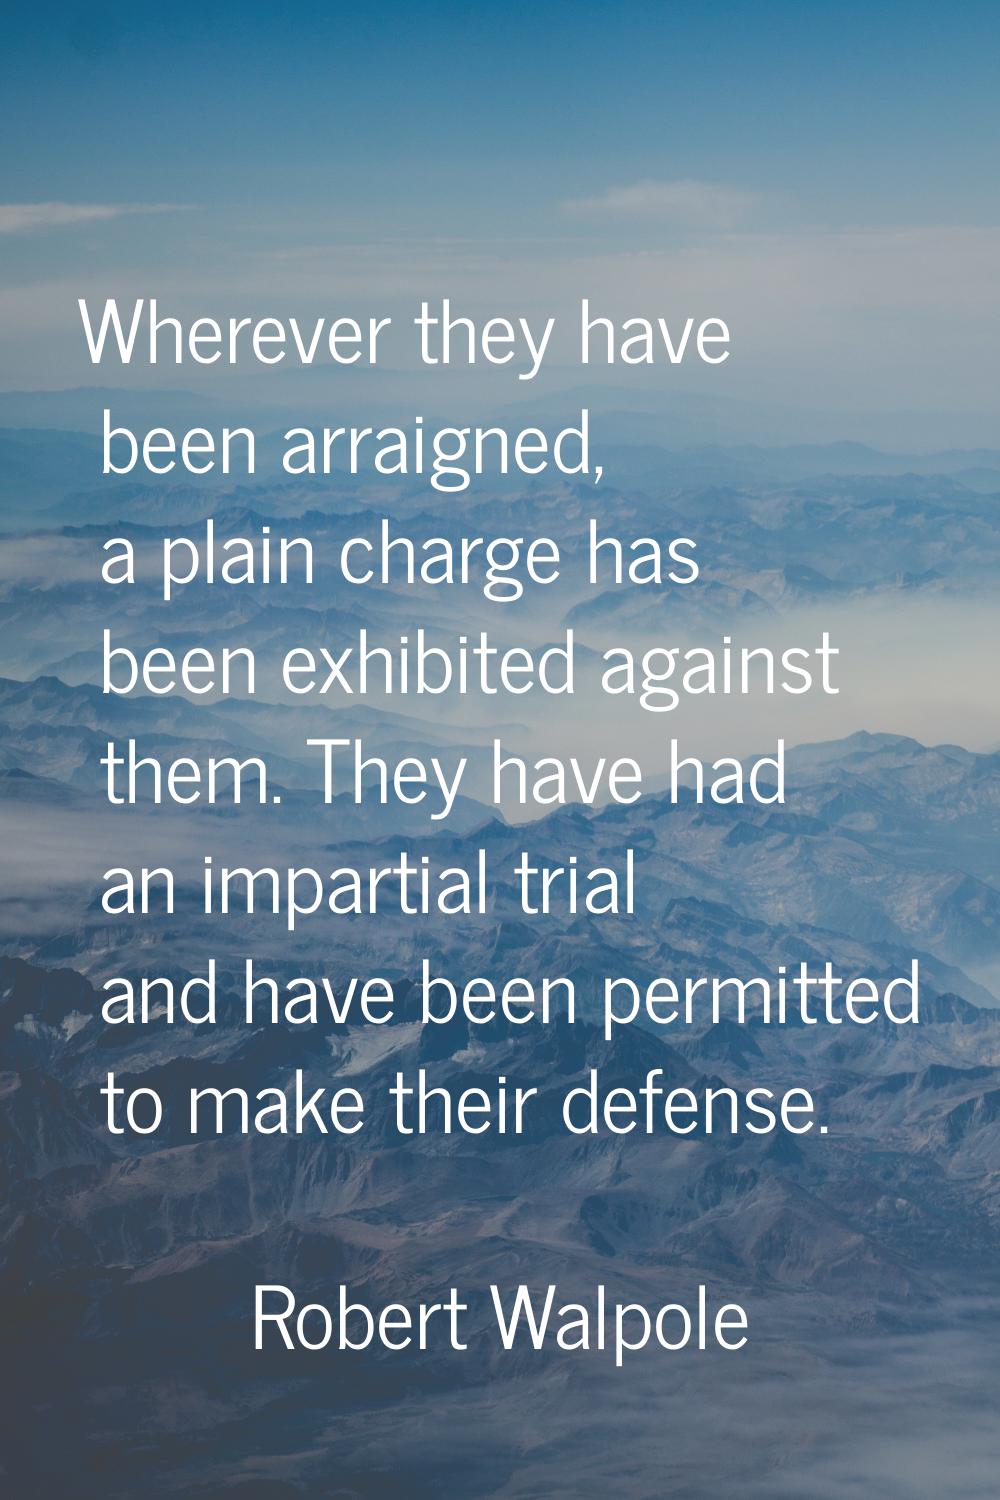 Wherever they have been arraigned, a plain charge has been exhibited against them. They have had an